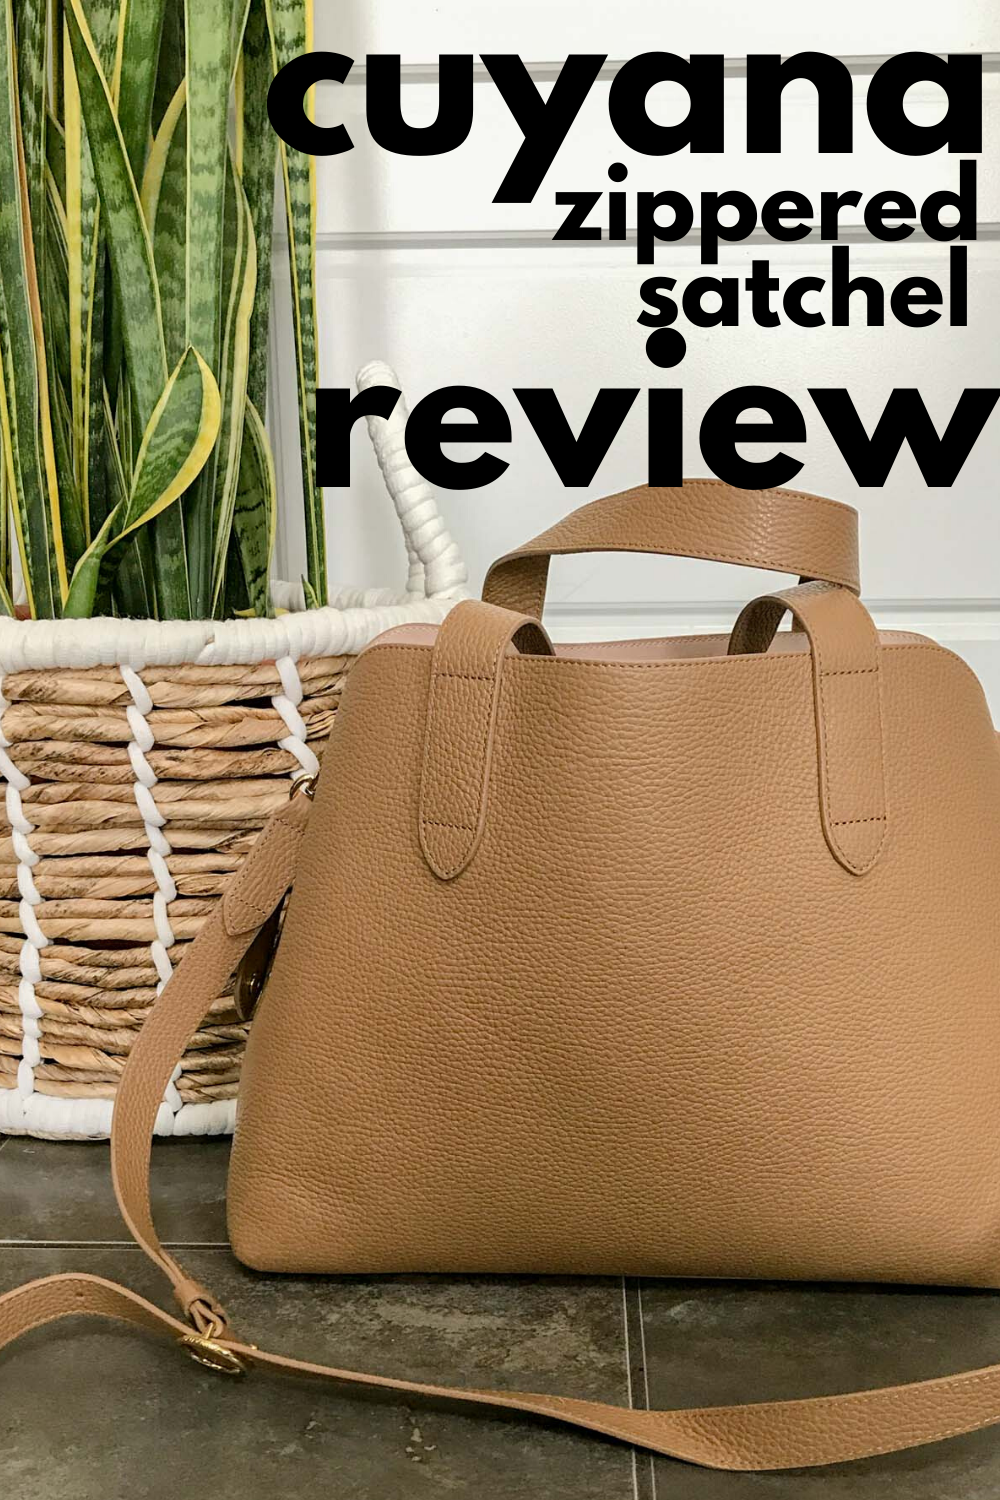 cuyana zippered satchel review